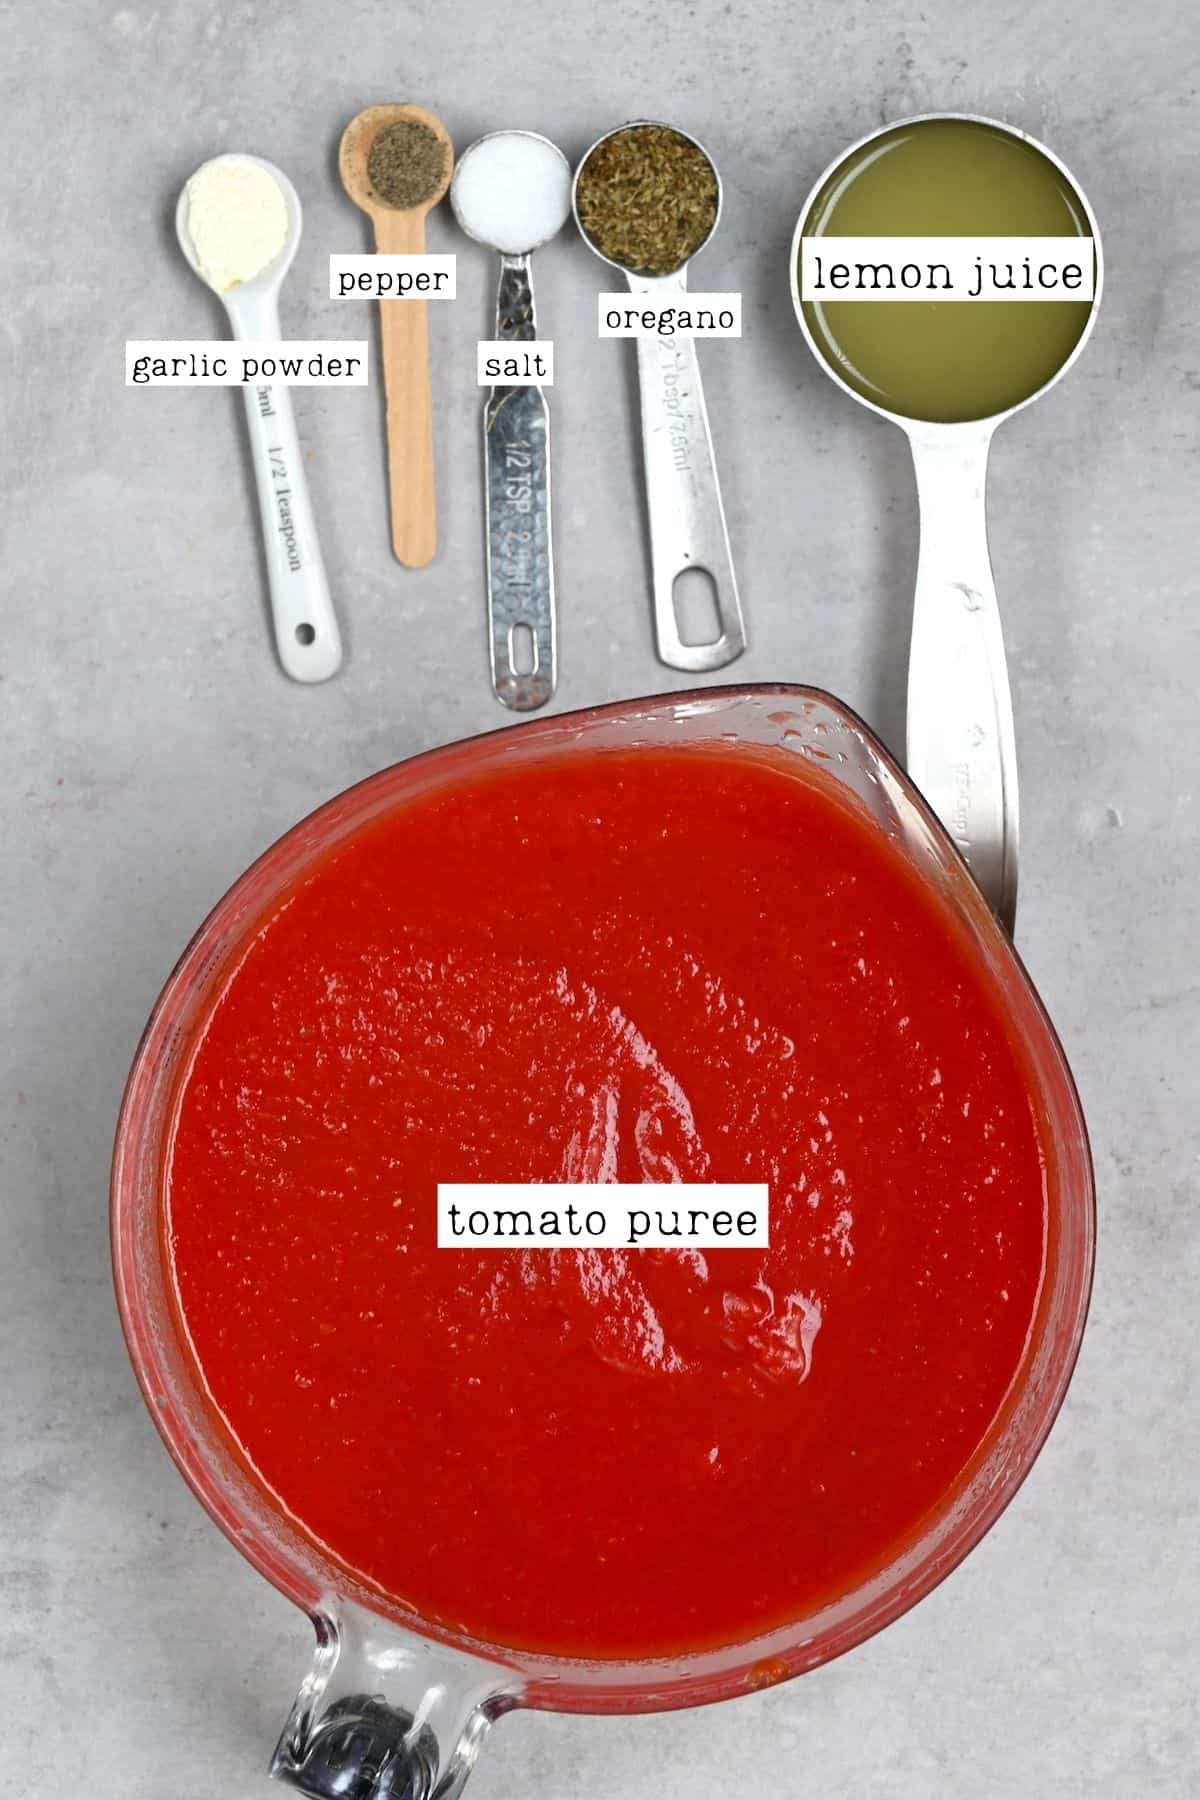 Ingredients for pizza sauce